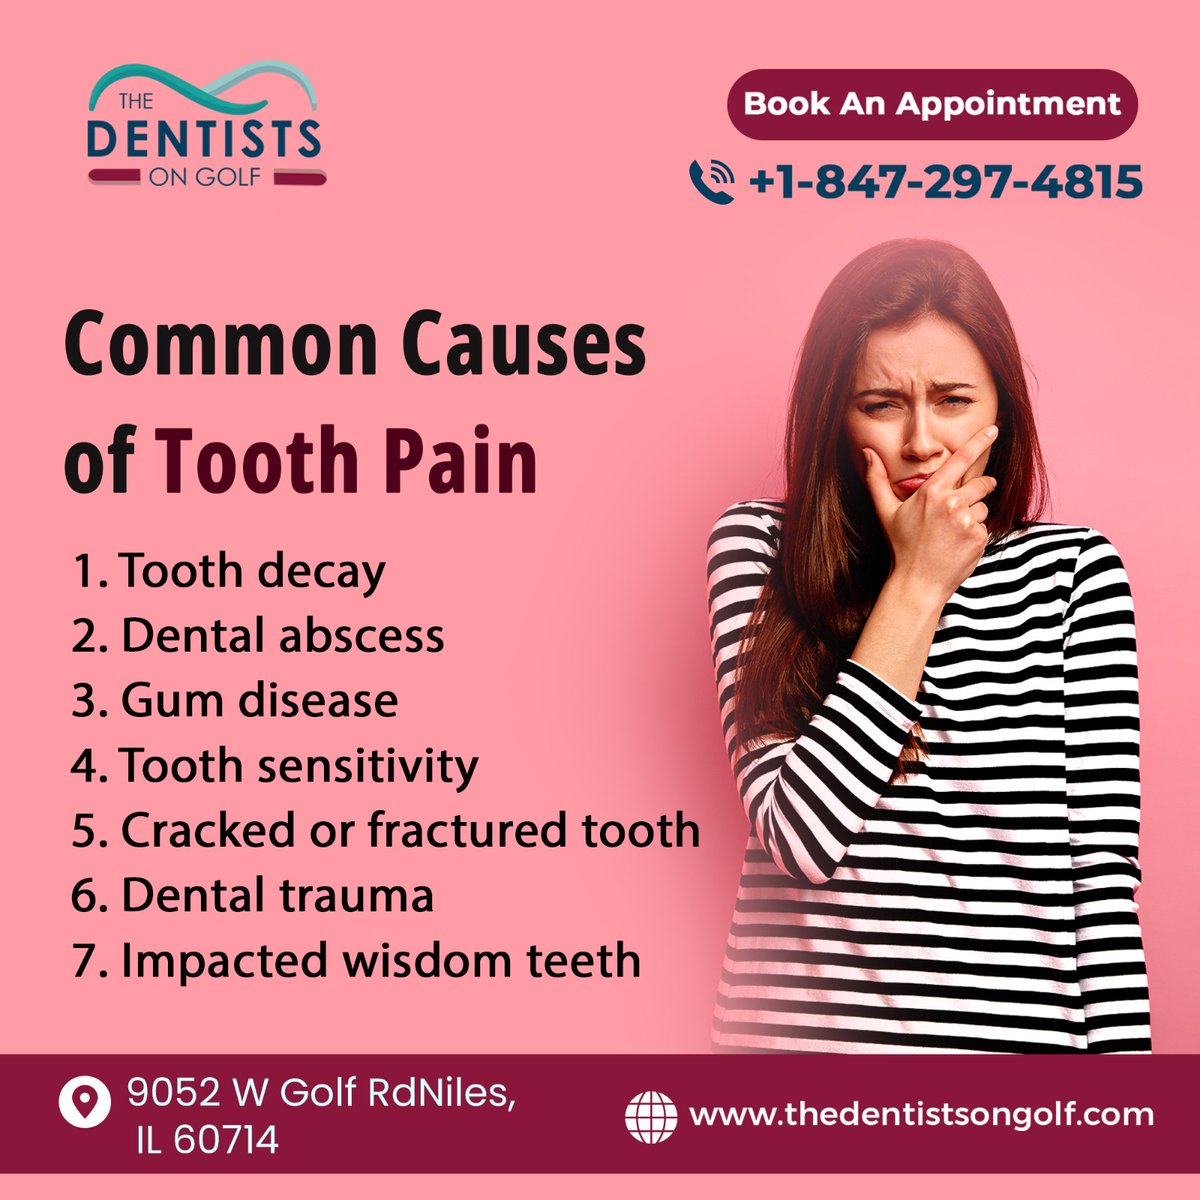 Experiencing tooth pain? Explore the various causes behind it, from cavities to gum problems.
.
For Appointments, contact us at 847-297-4815 or
Visit: thedentistsongolf.com 
.
#toothache #cosmeticdentistry #dentalcleaning 
#dentaltreatment #dentalveeners #dentalbonds #dentist